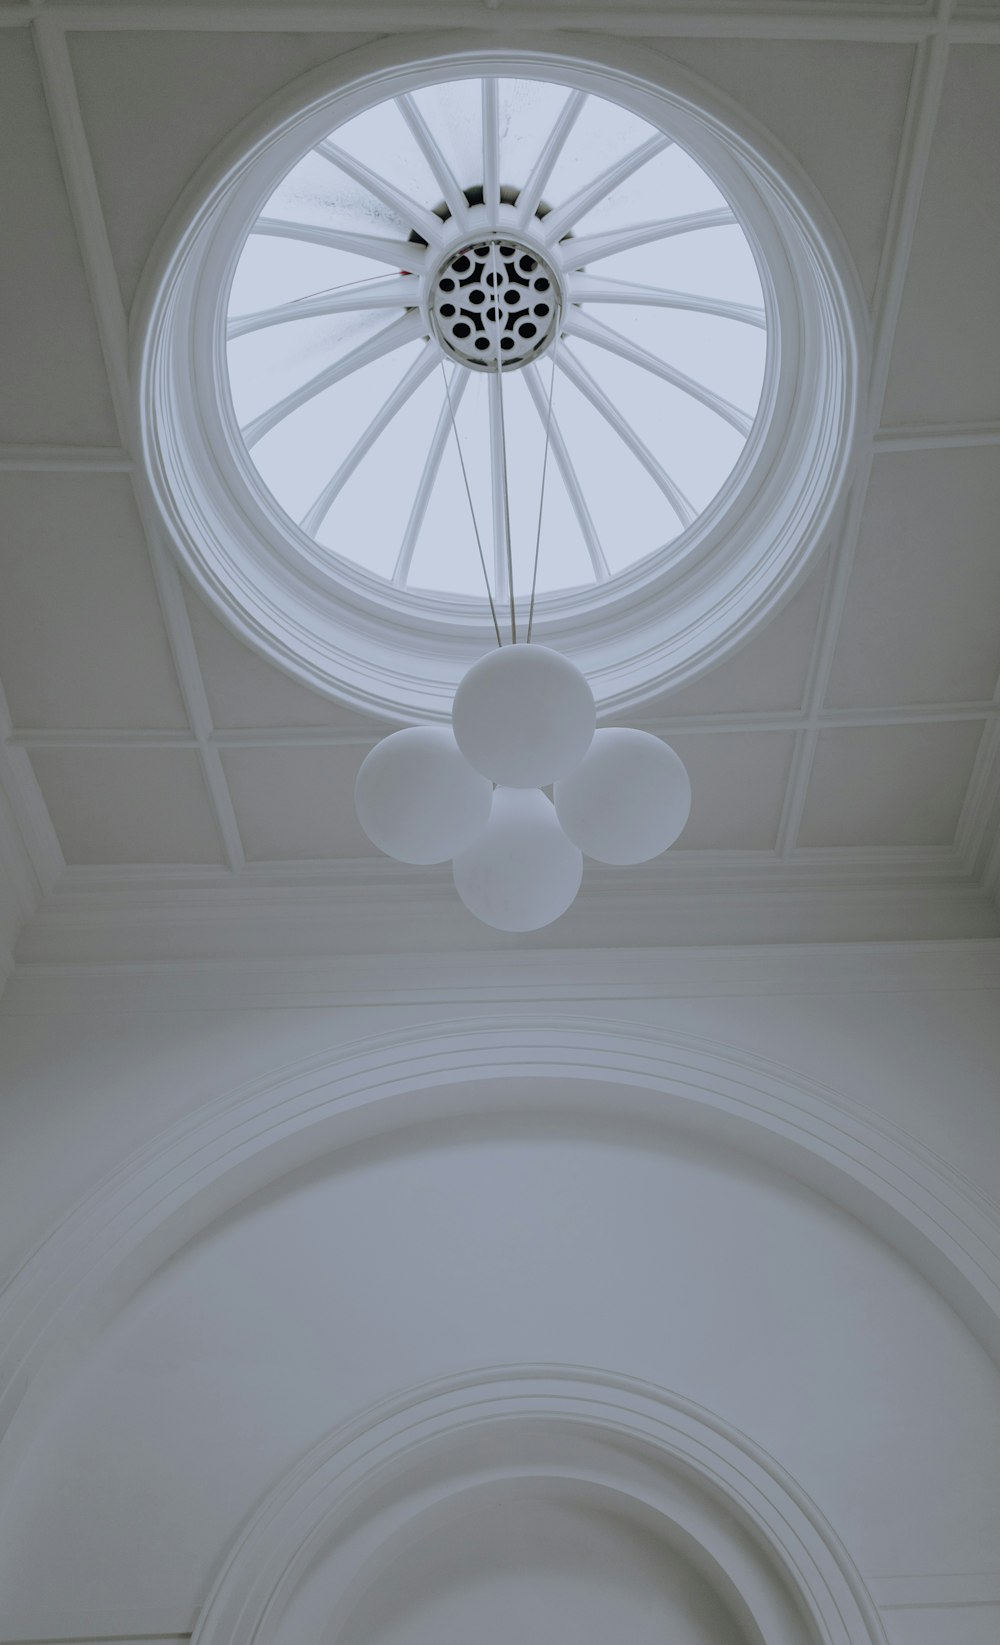 a ceiling with a circular window and a light fixture